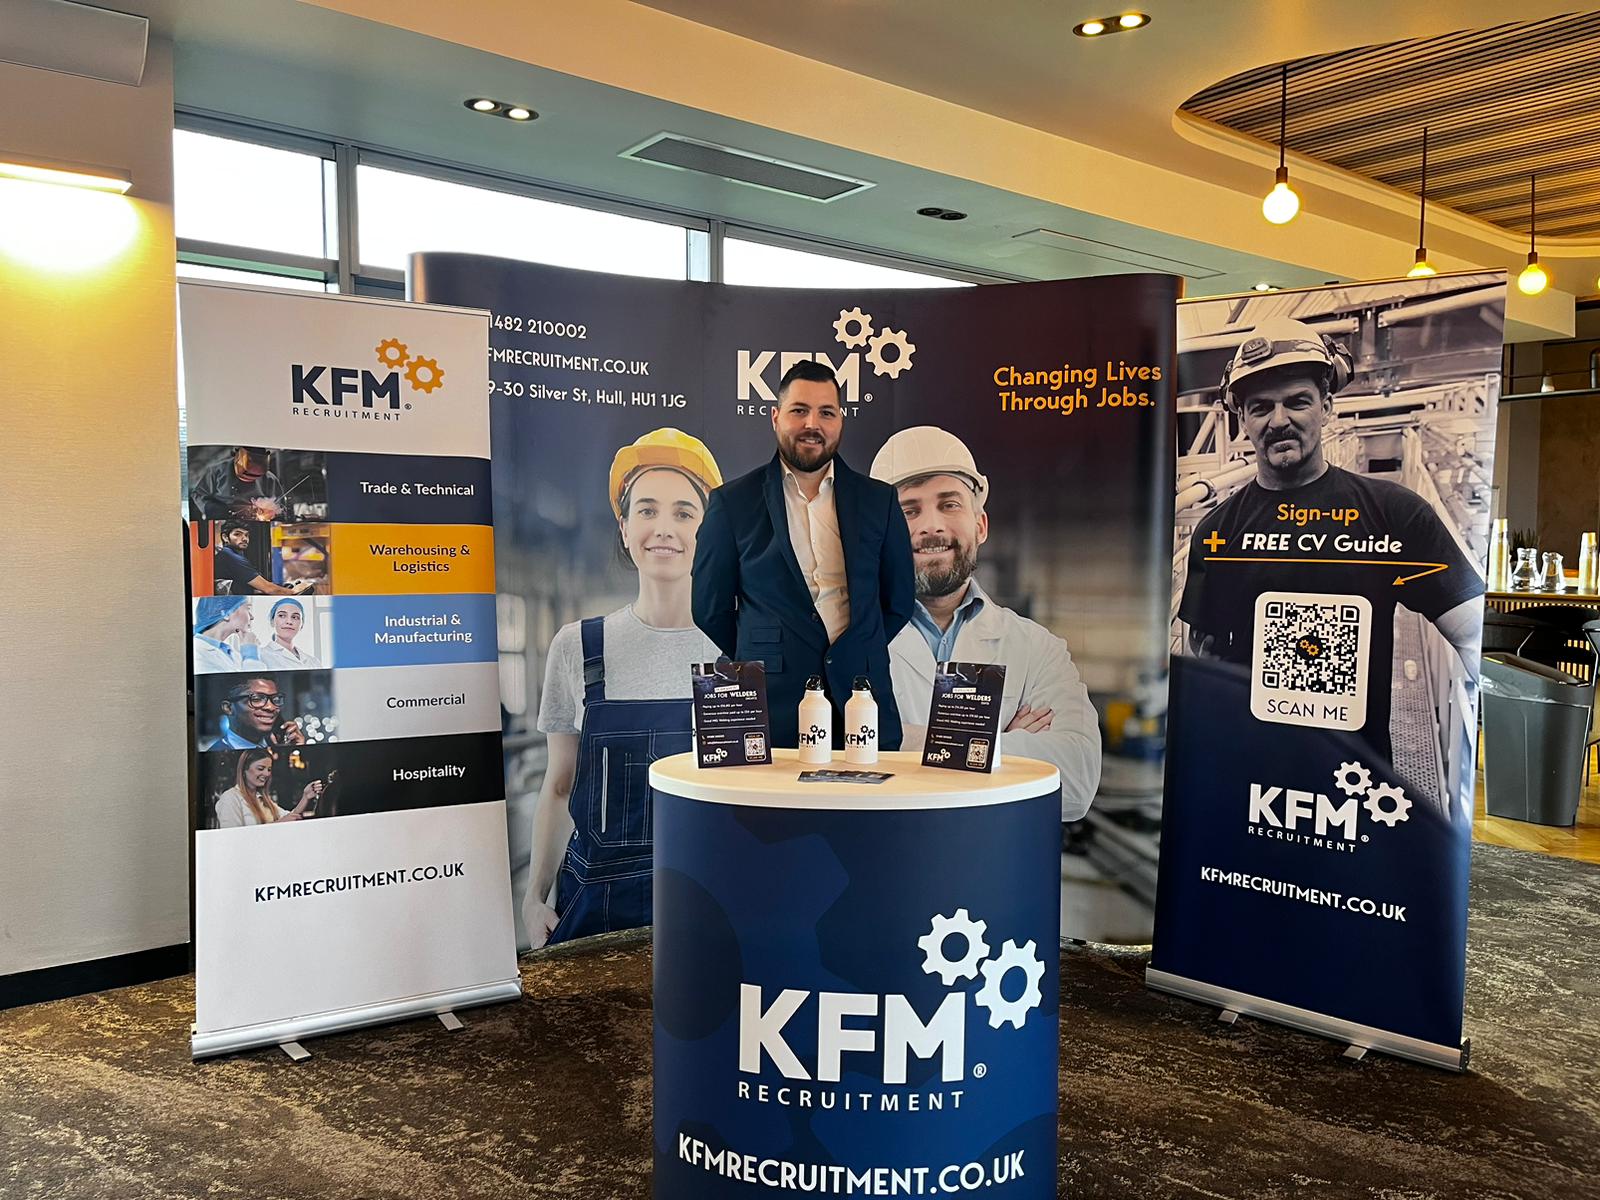 KFM at our event in Leeds